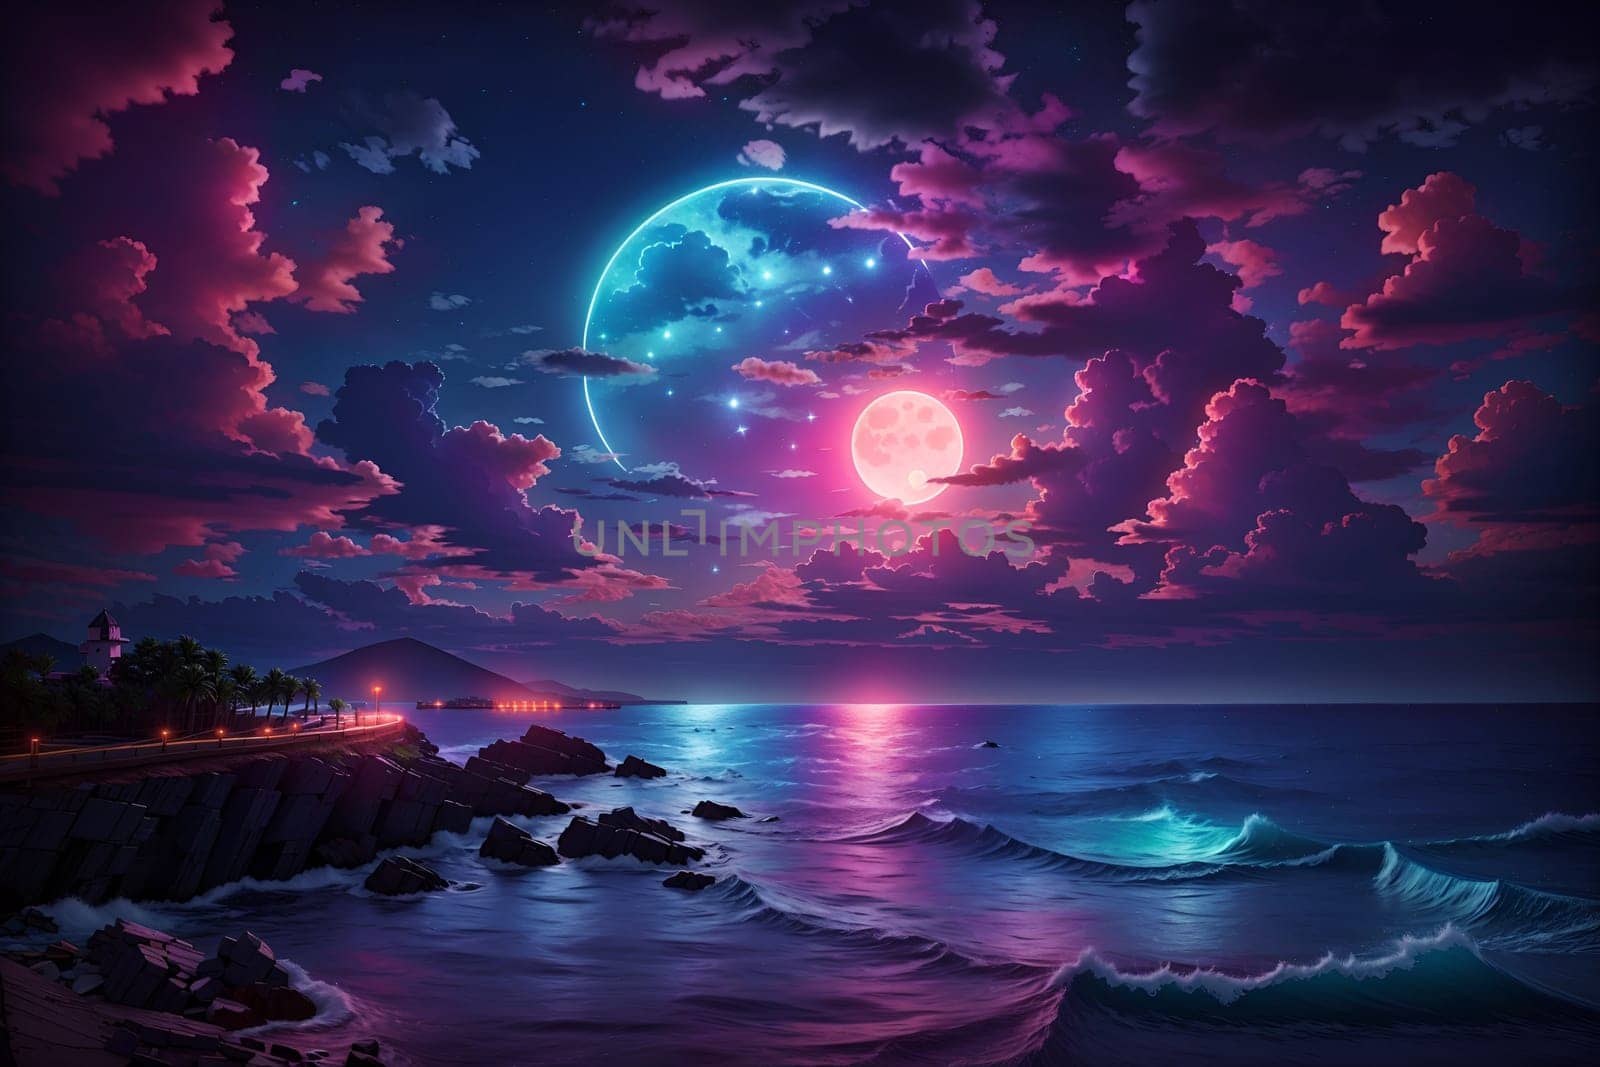 A beautiful painting capturing the serene sight of a full moon shining over the vast ocean.